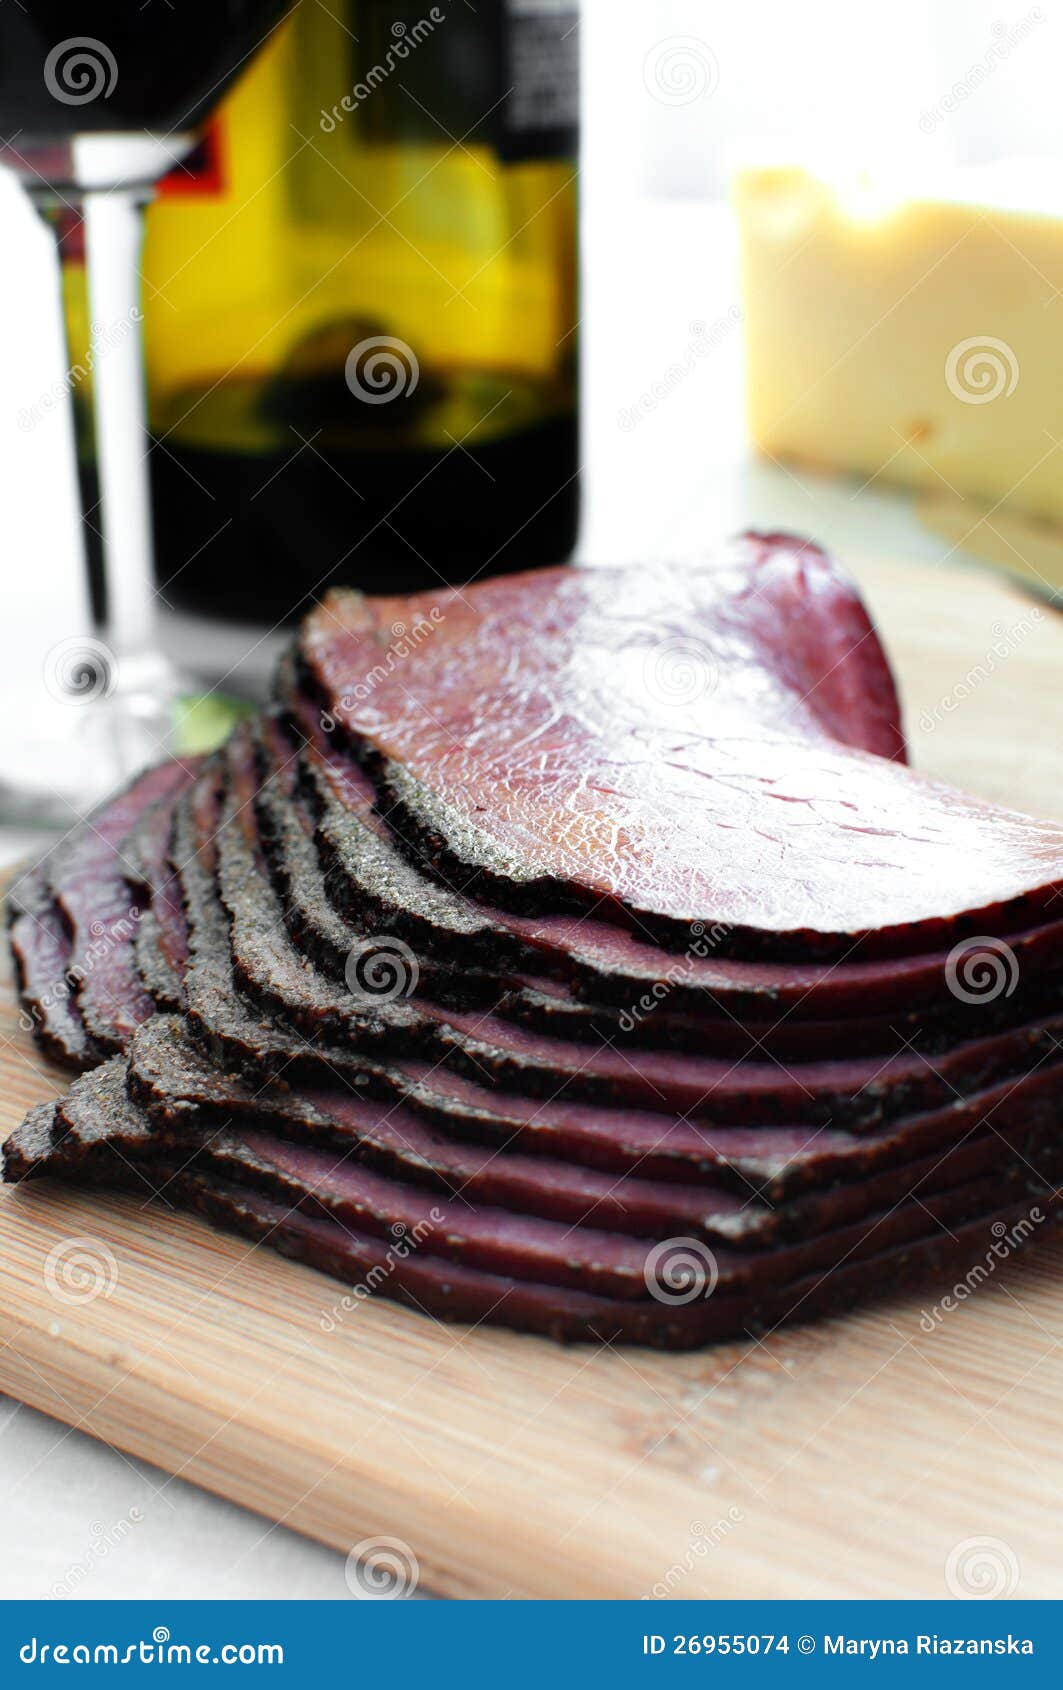 Deli Meat Sliced And Cheese And Wine Stock Photo - Image of glass, meal A Deli Sells Sliced Meat And Cheese